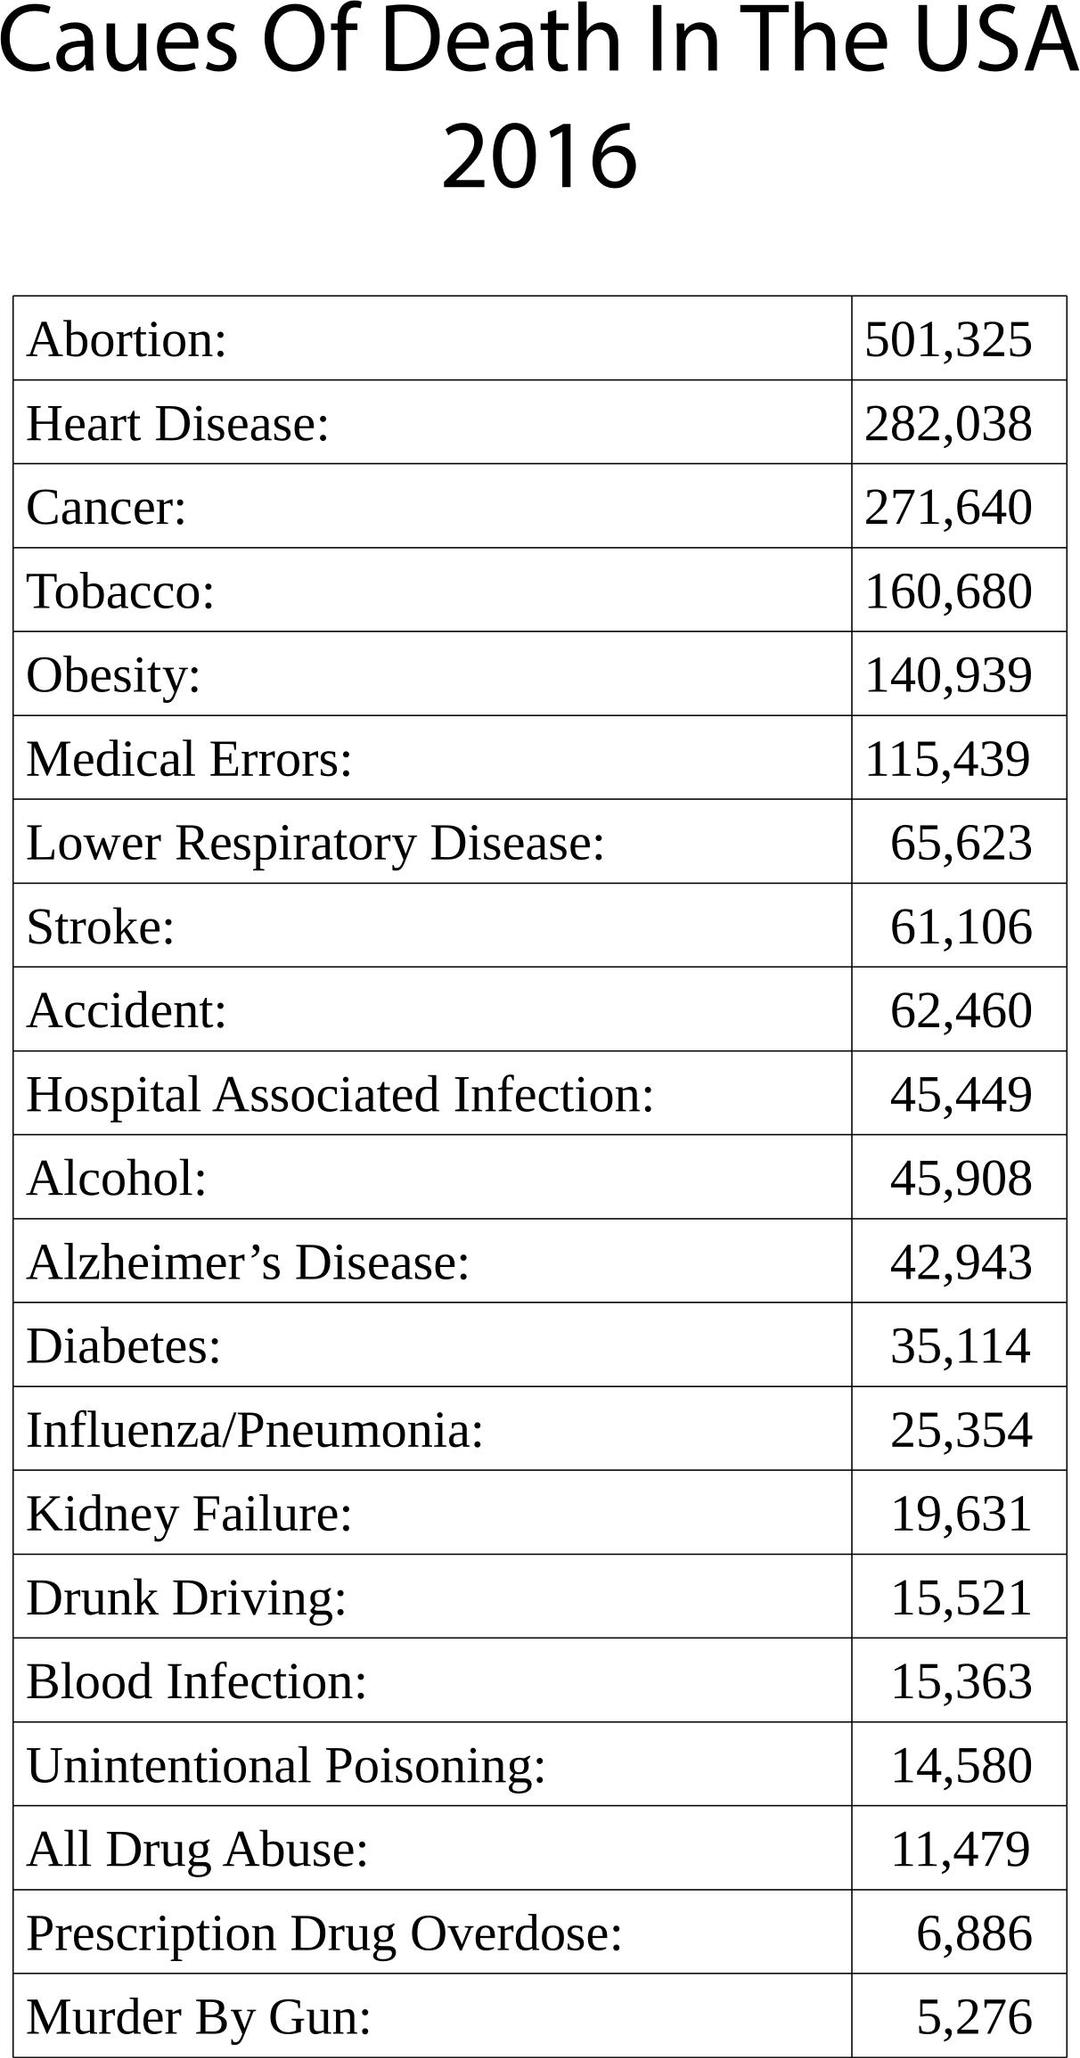 Causes Of Death In The USA 2016 png transparent